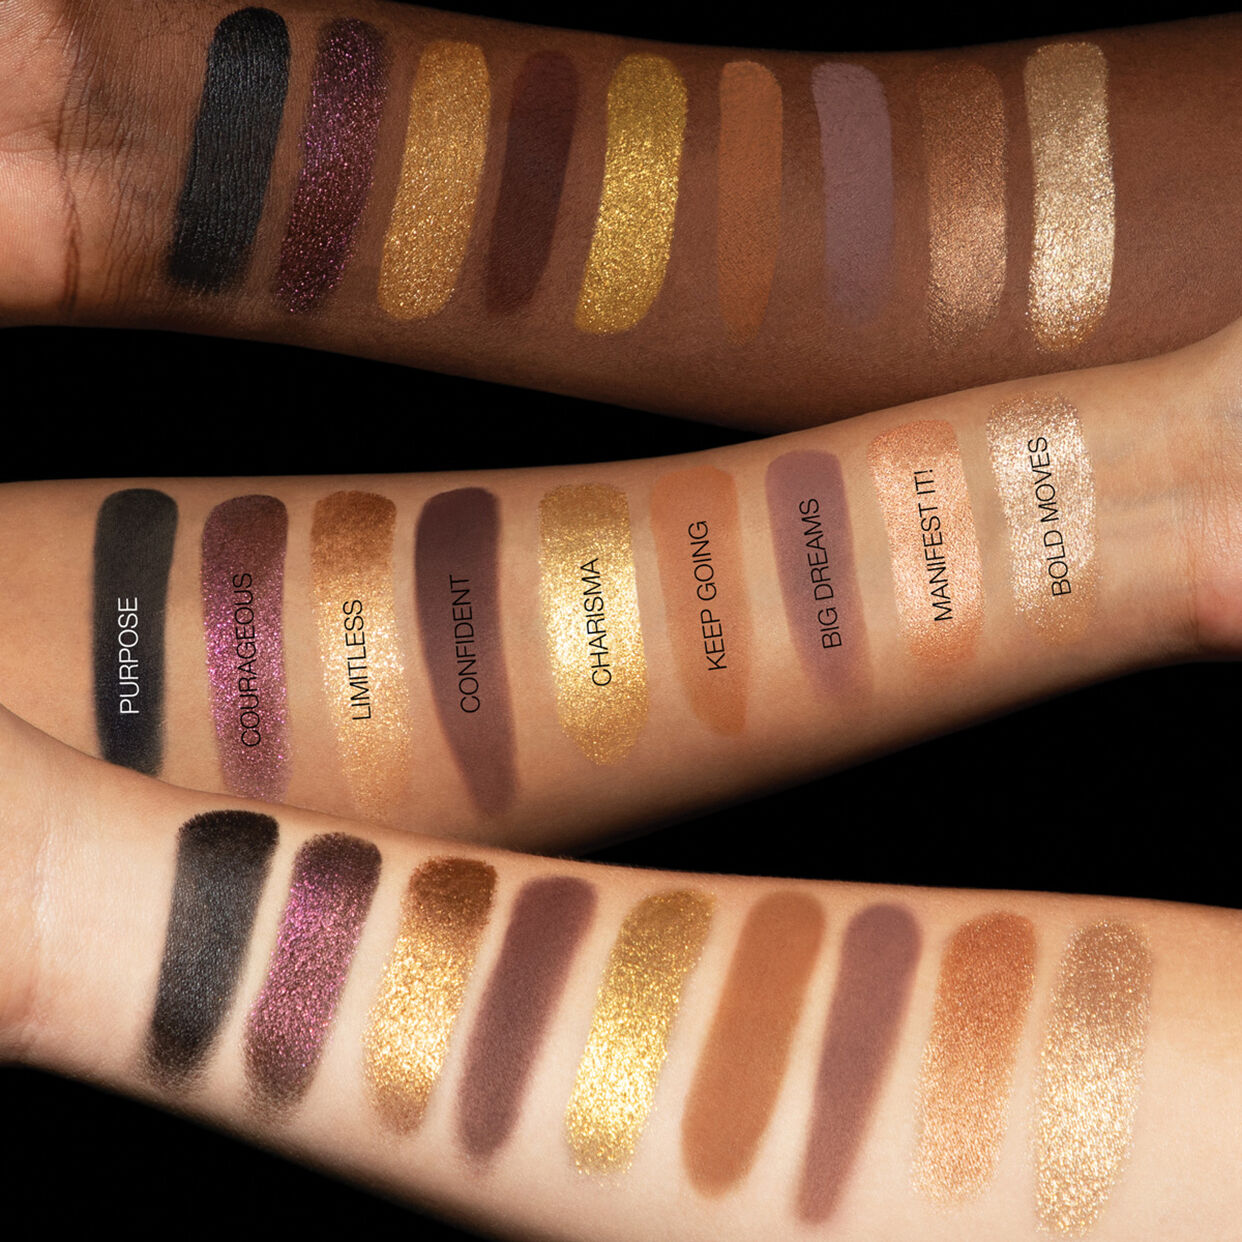 HUDA BEAUTY Empowered Eyeshadow Palette Swatches gold Shades